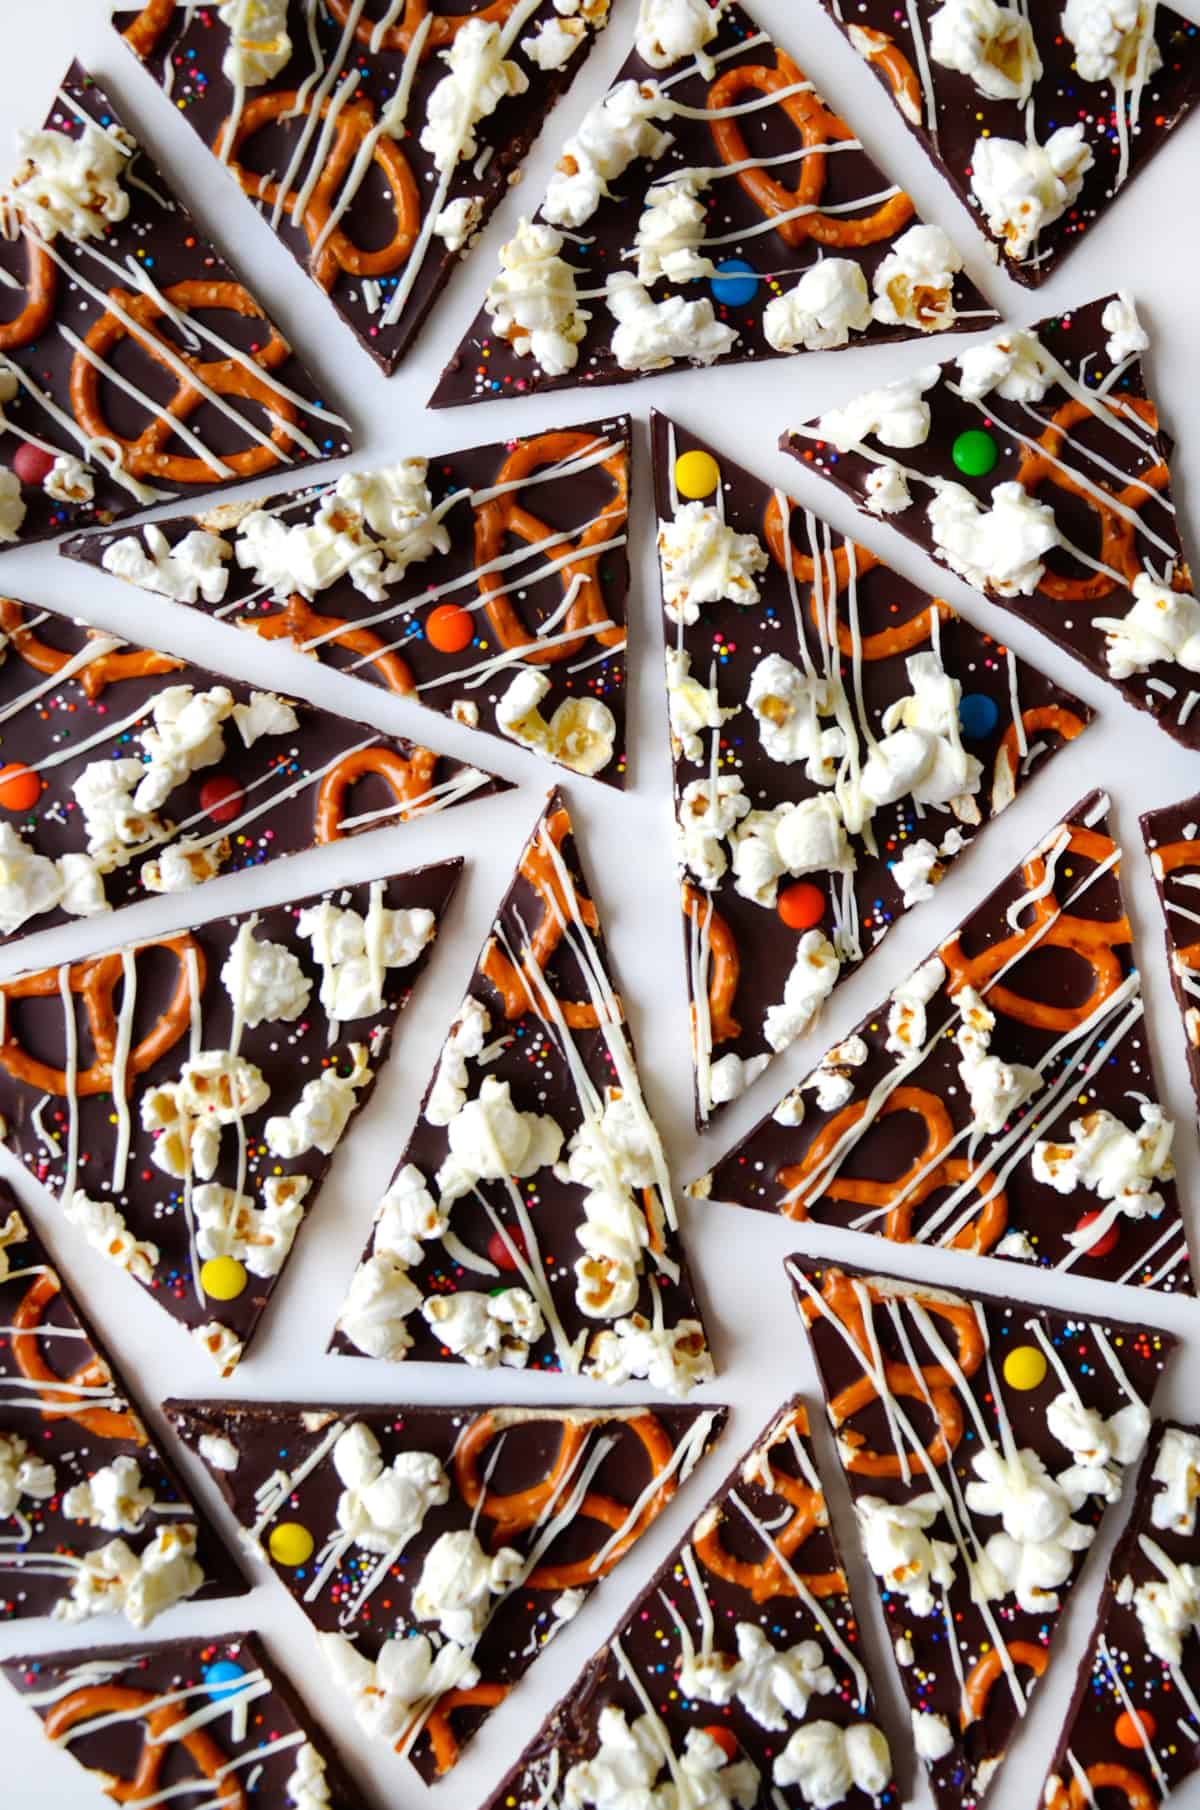 Chocolate bark candy topped with popcorn, pretzels, M&Ms and drizzled with white chocolate.